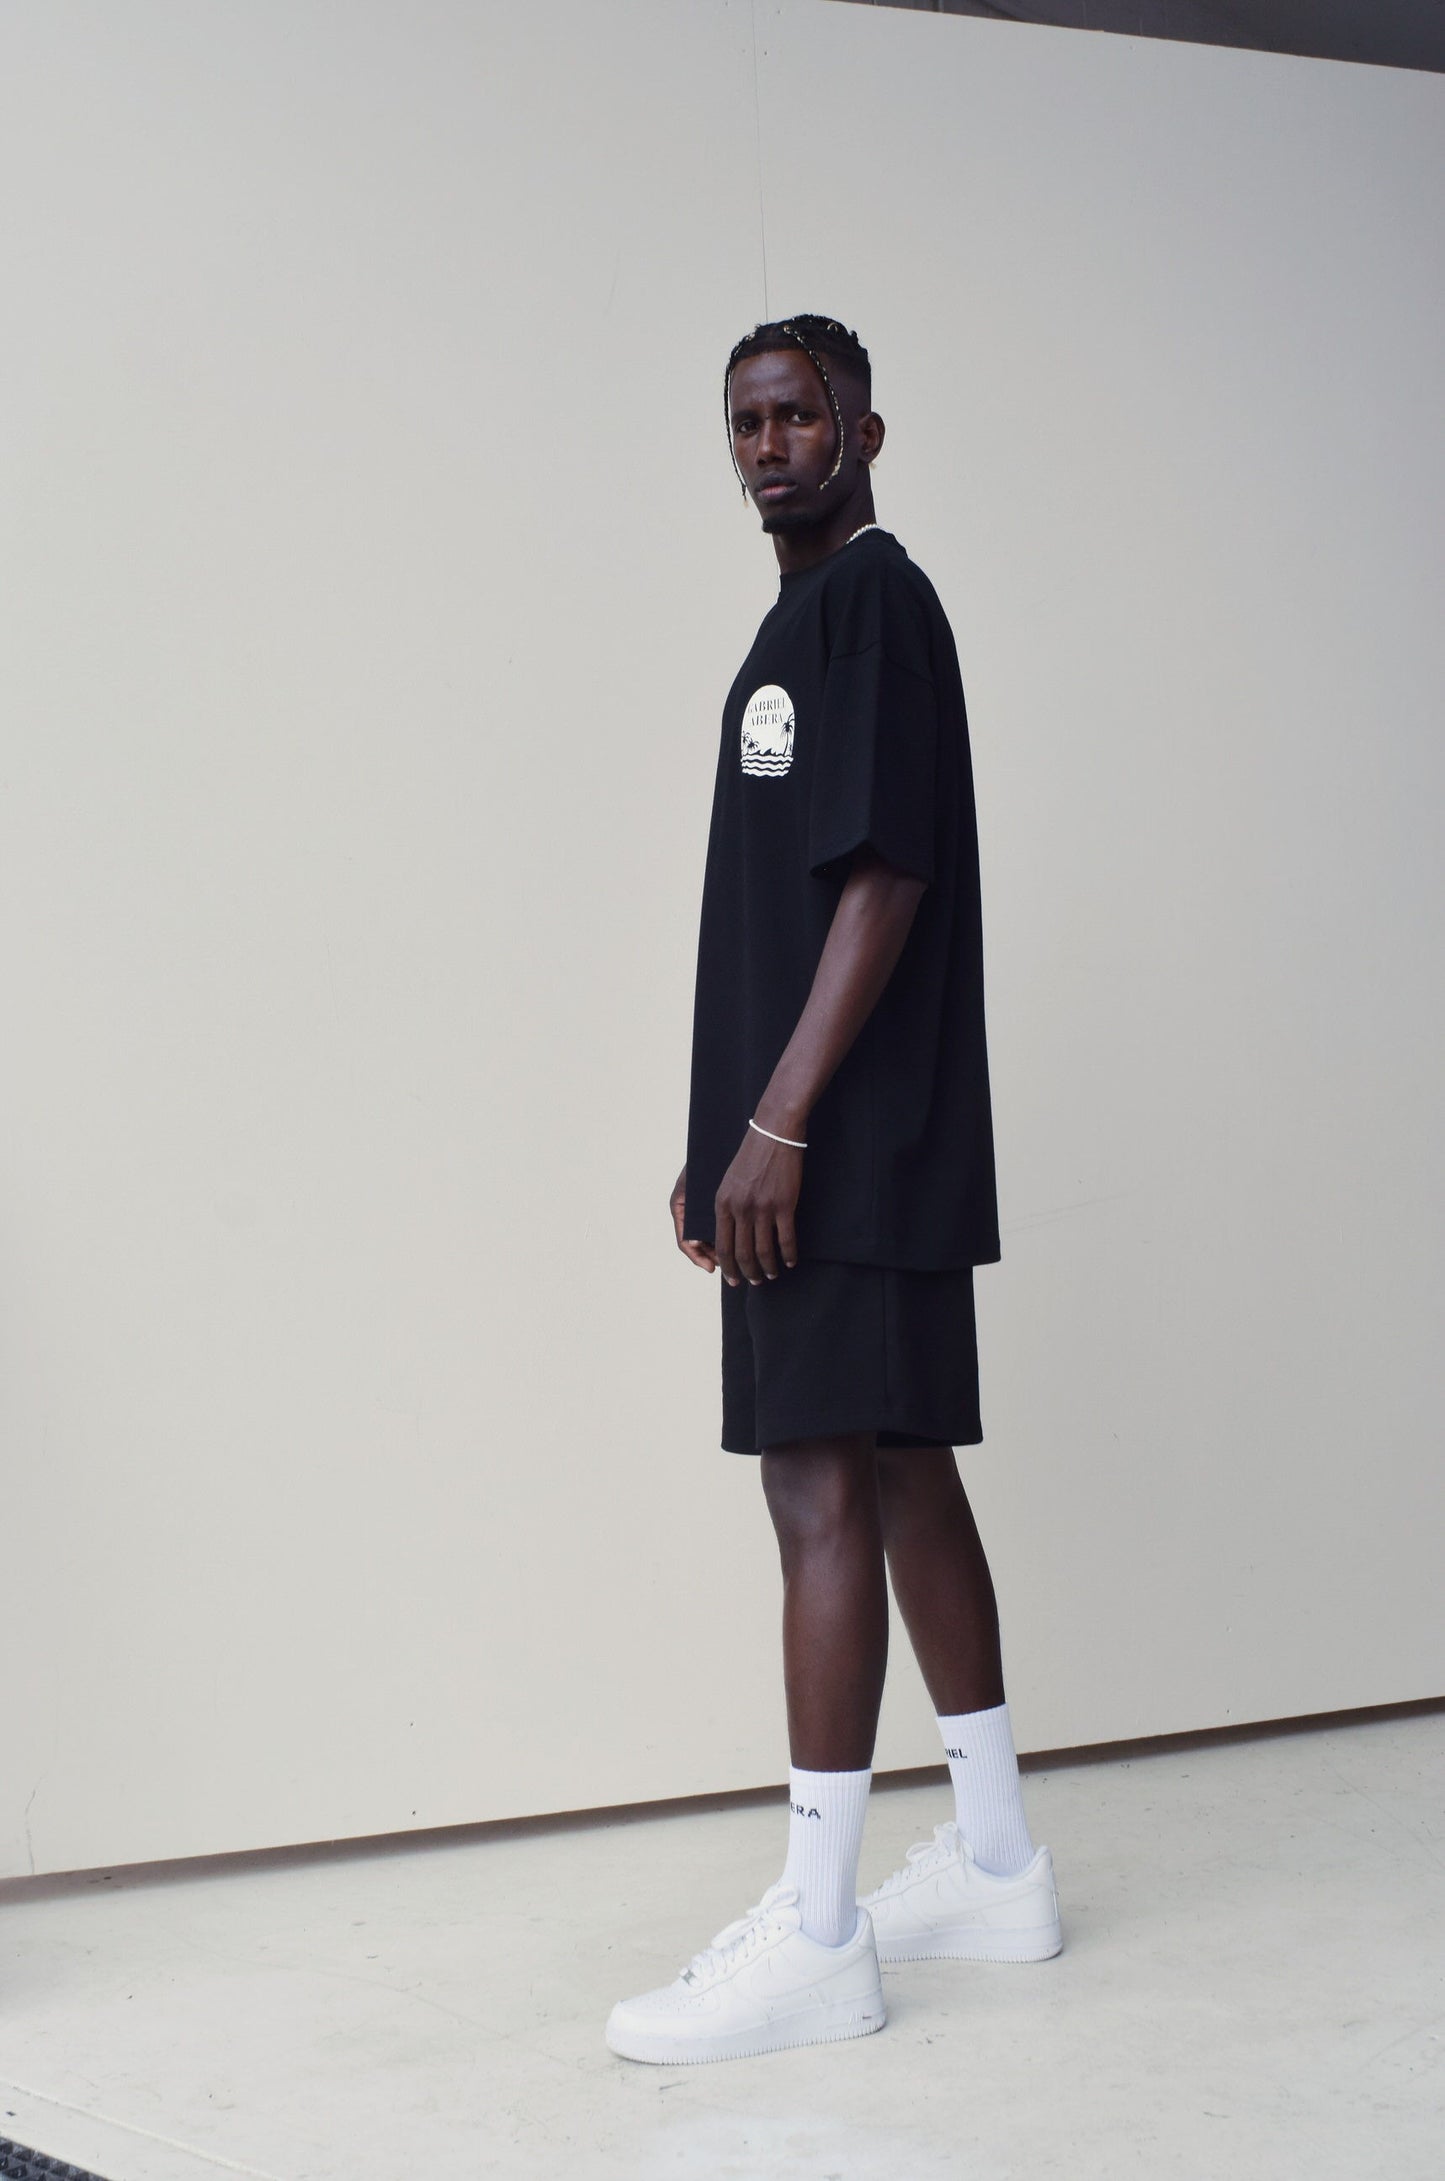 Male Model wearing a Black oversize Tshirt with round brand design